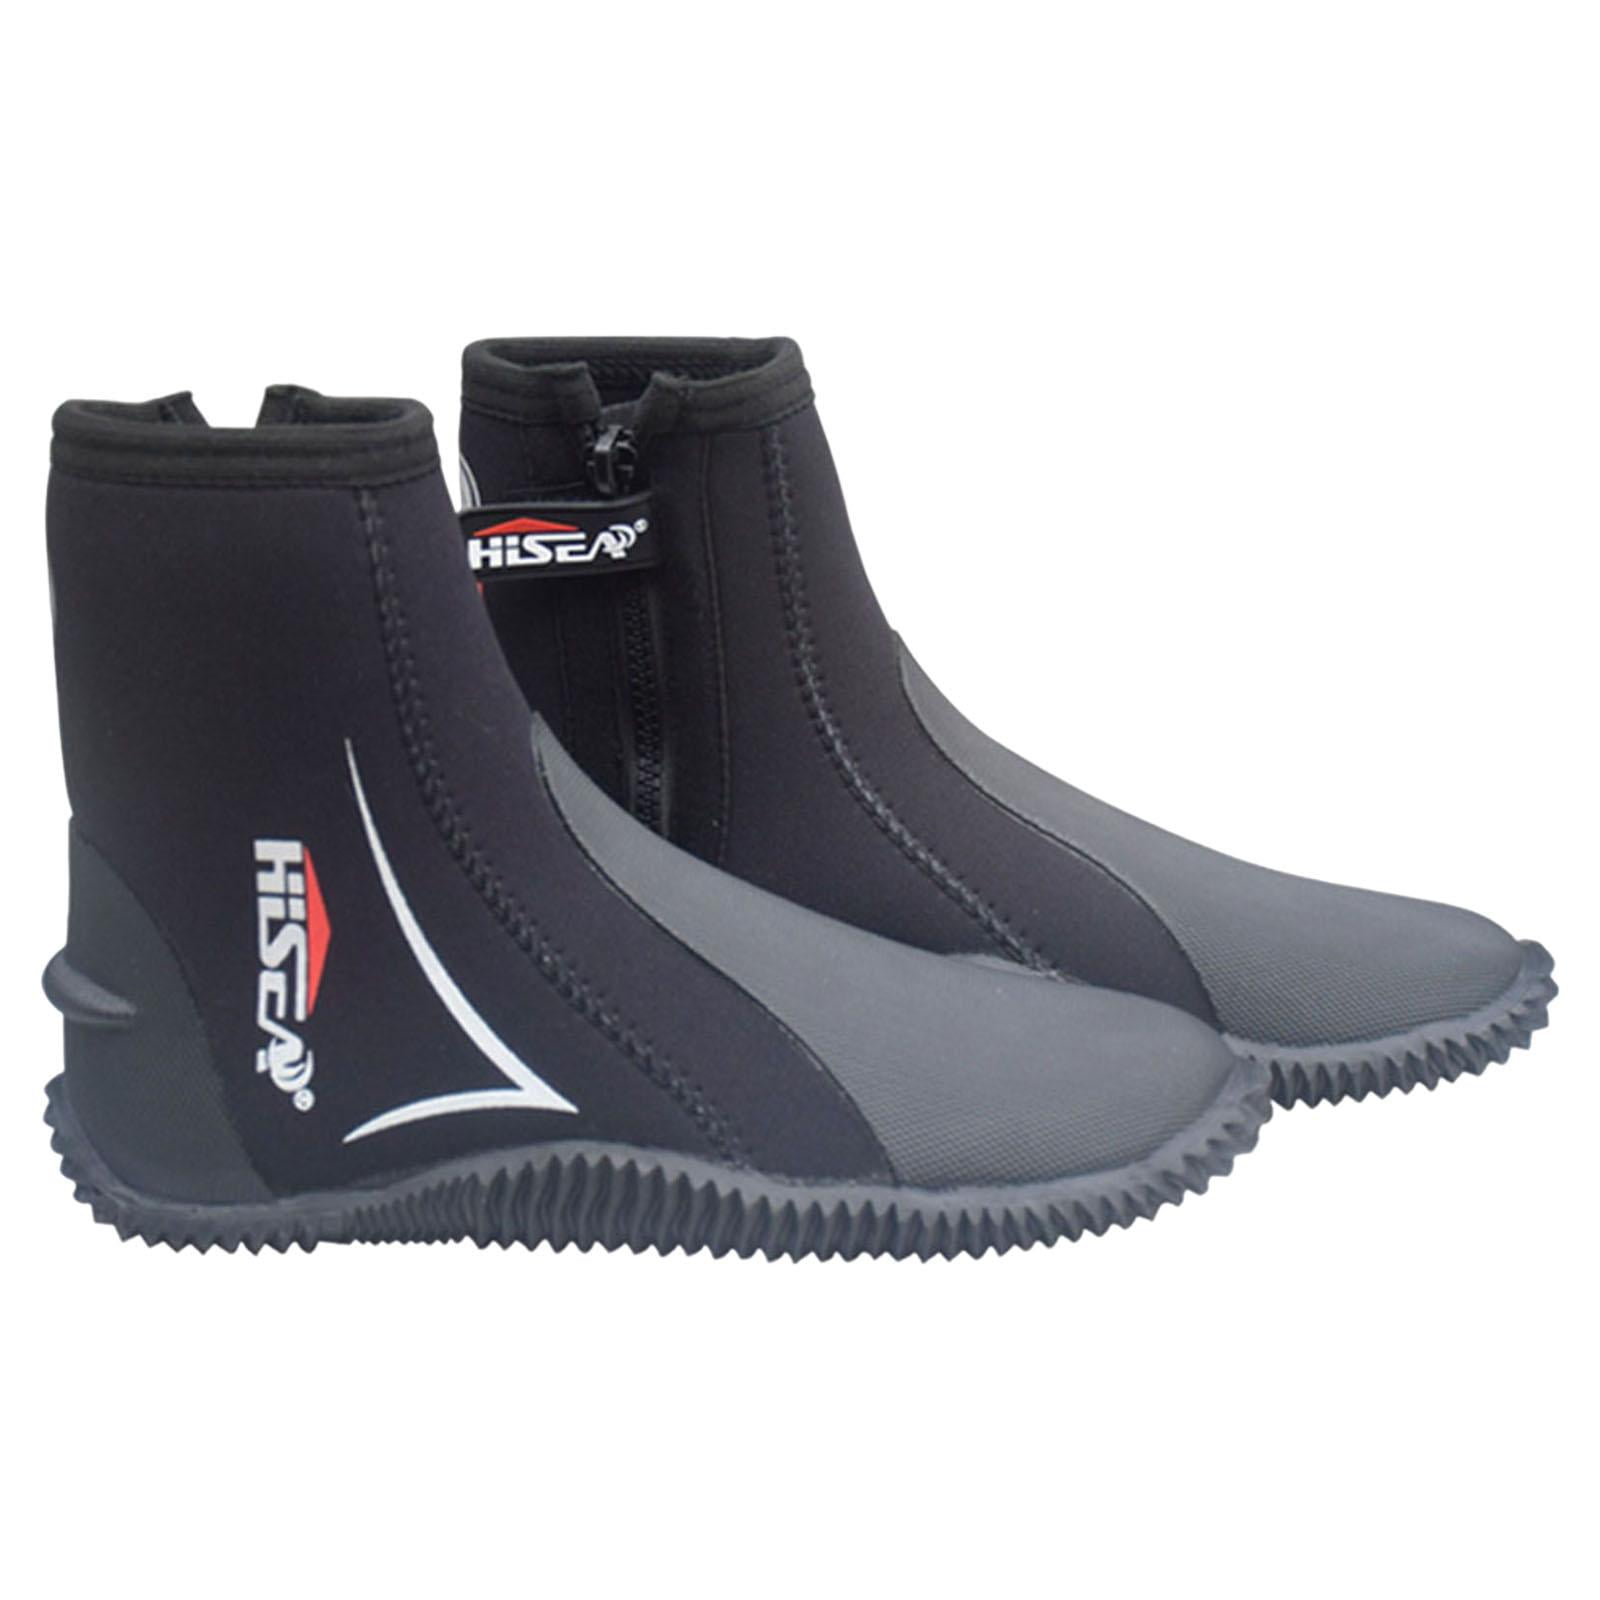 Mares Rubber Sole Classic 5mm Dive Boot 